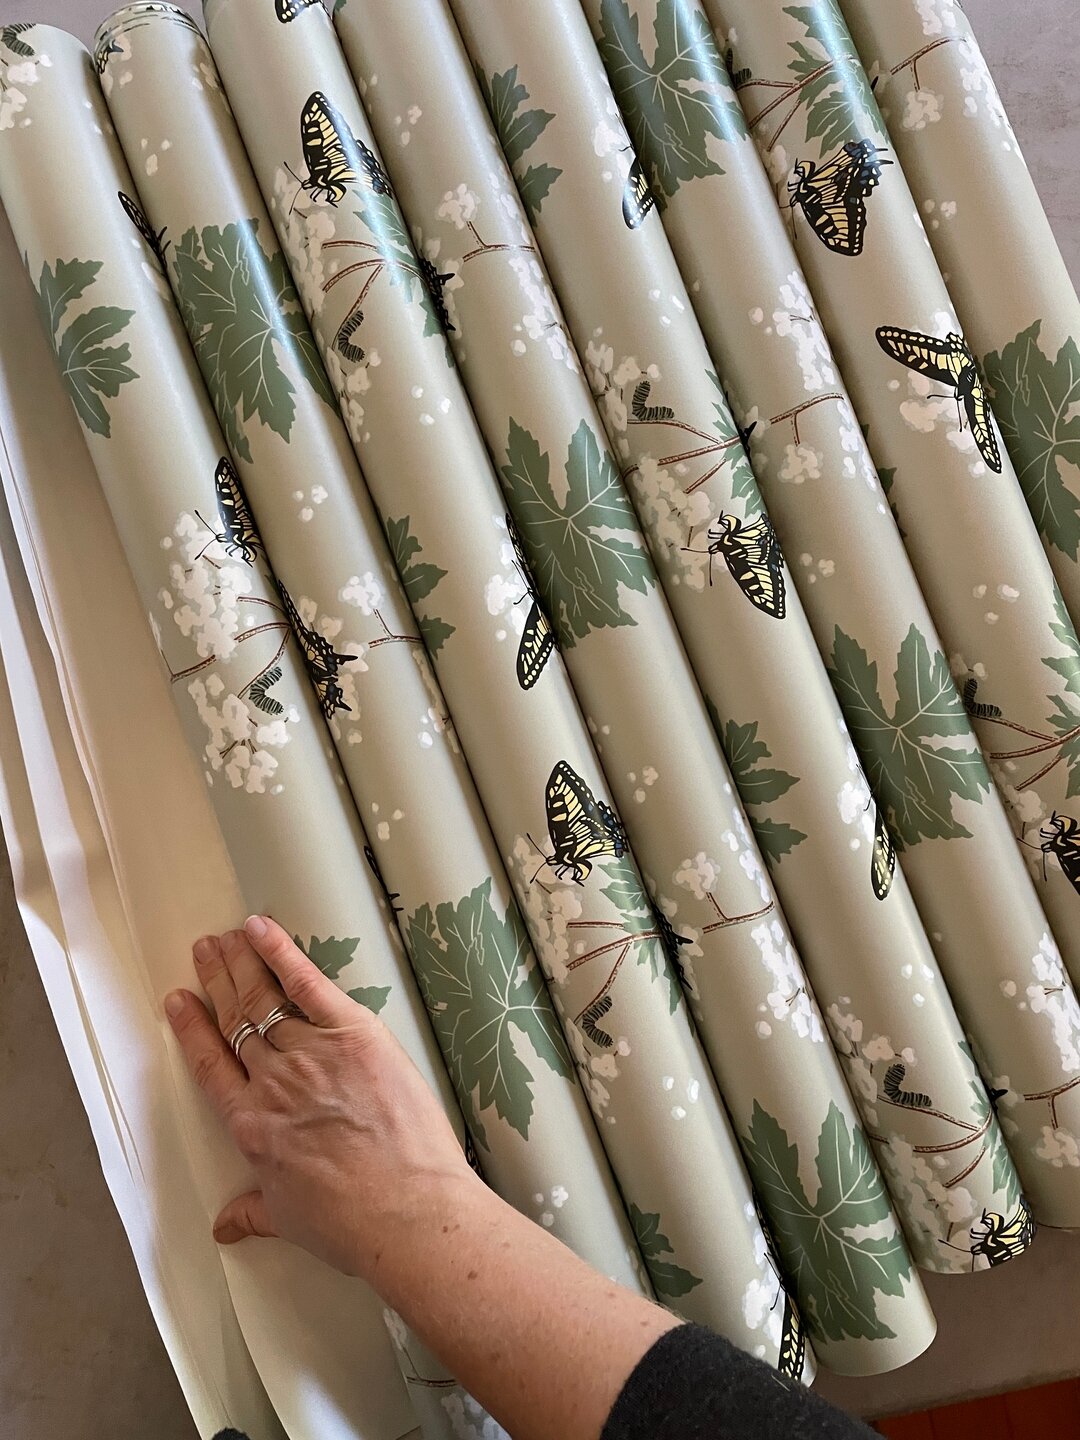 I swear this isn&rsquo;t a @spoonflower ad - I just really love their products! Honestly, I was REALLY nervous about wallpapering our guest bathroom. I have never put up wallpaper before, and it is a really small, complicated room. But their pre-past